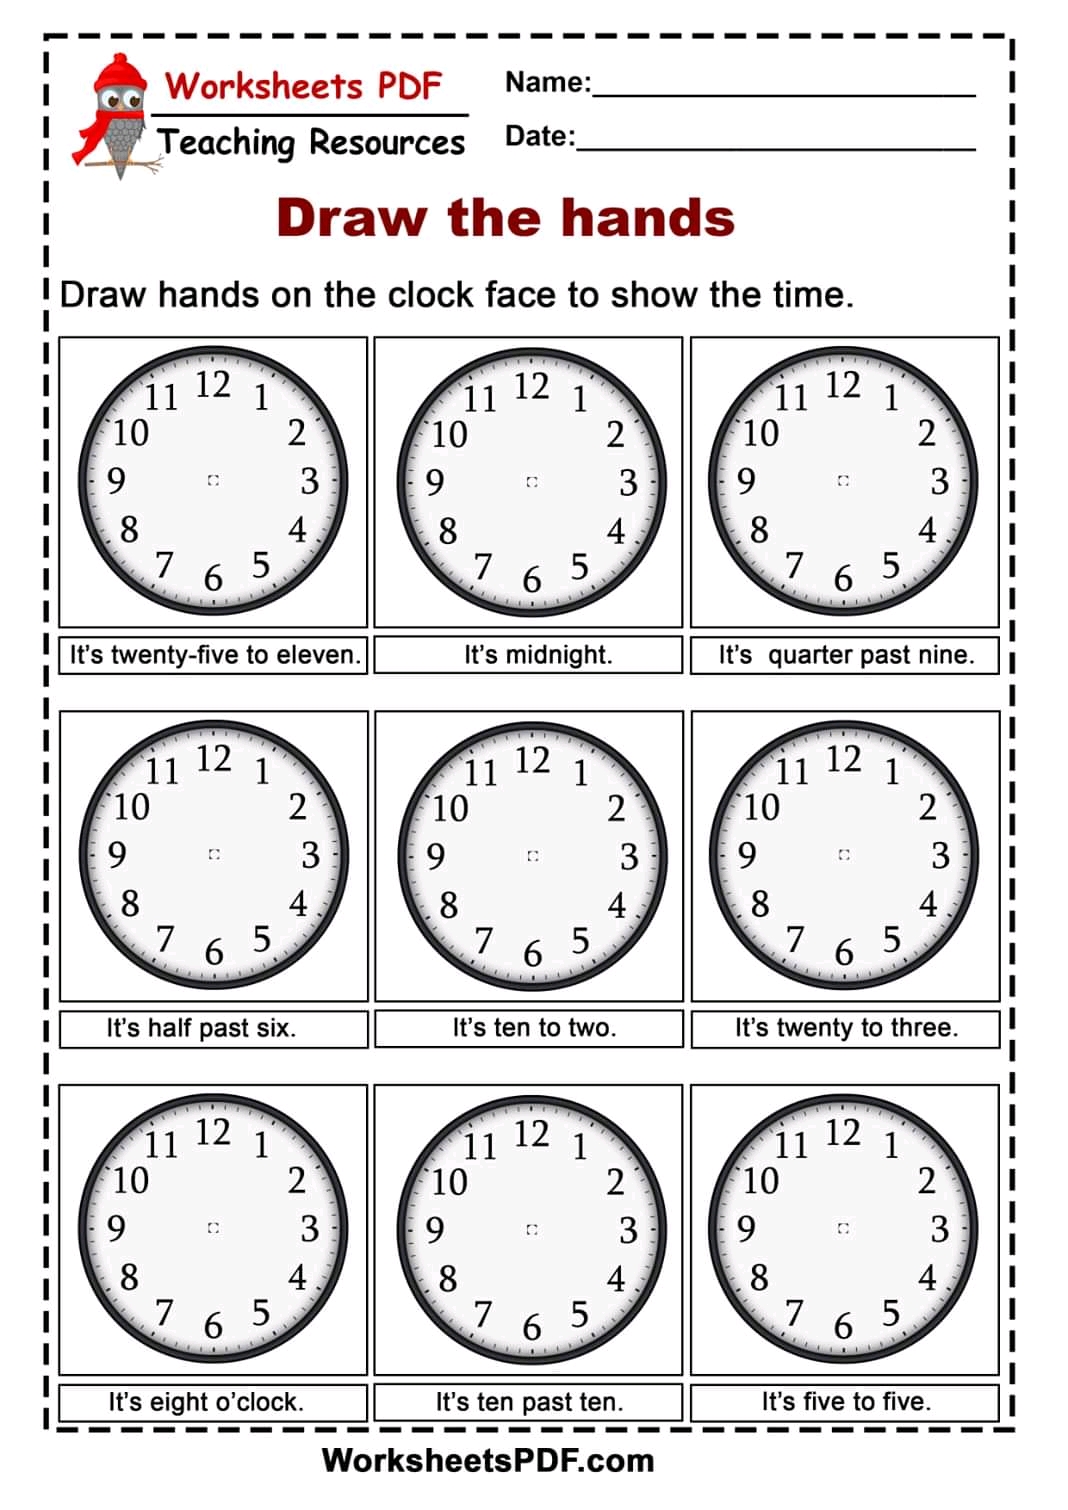 pdf-worksheets-telling-the-time